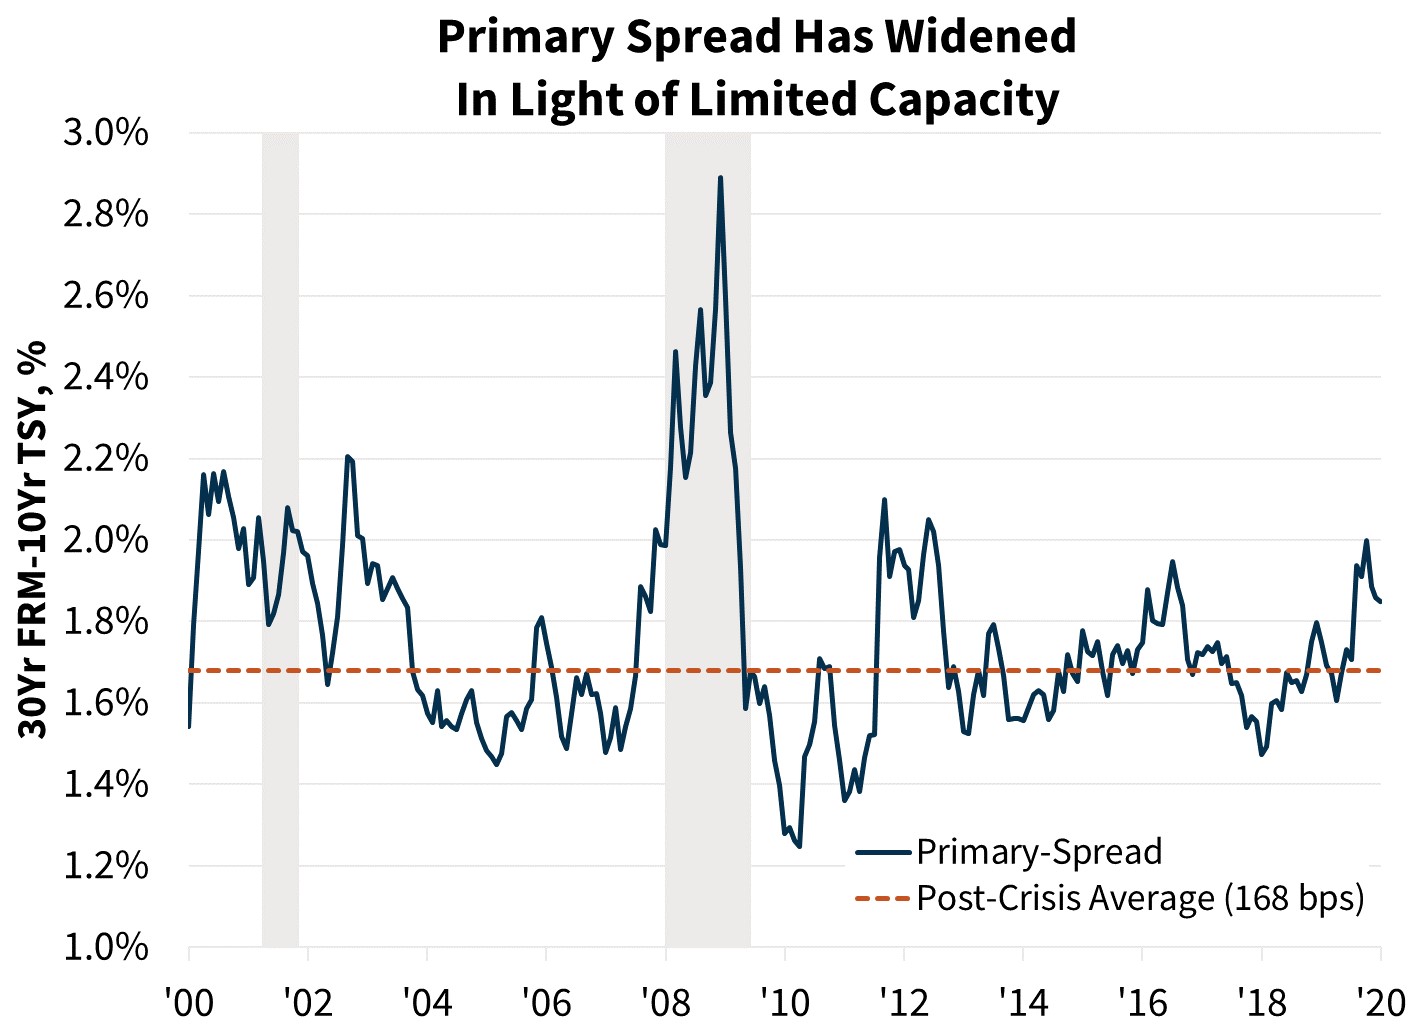 Primary Spread Has Widened In Light of Limited Capacity